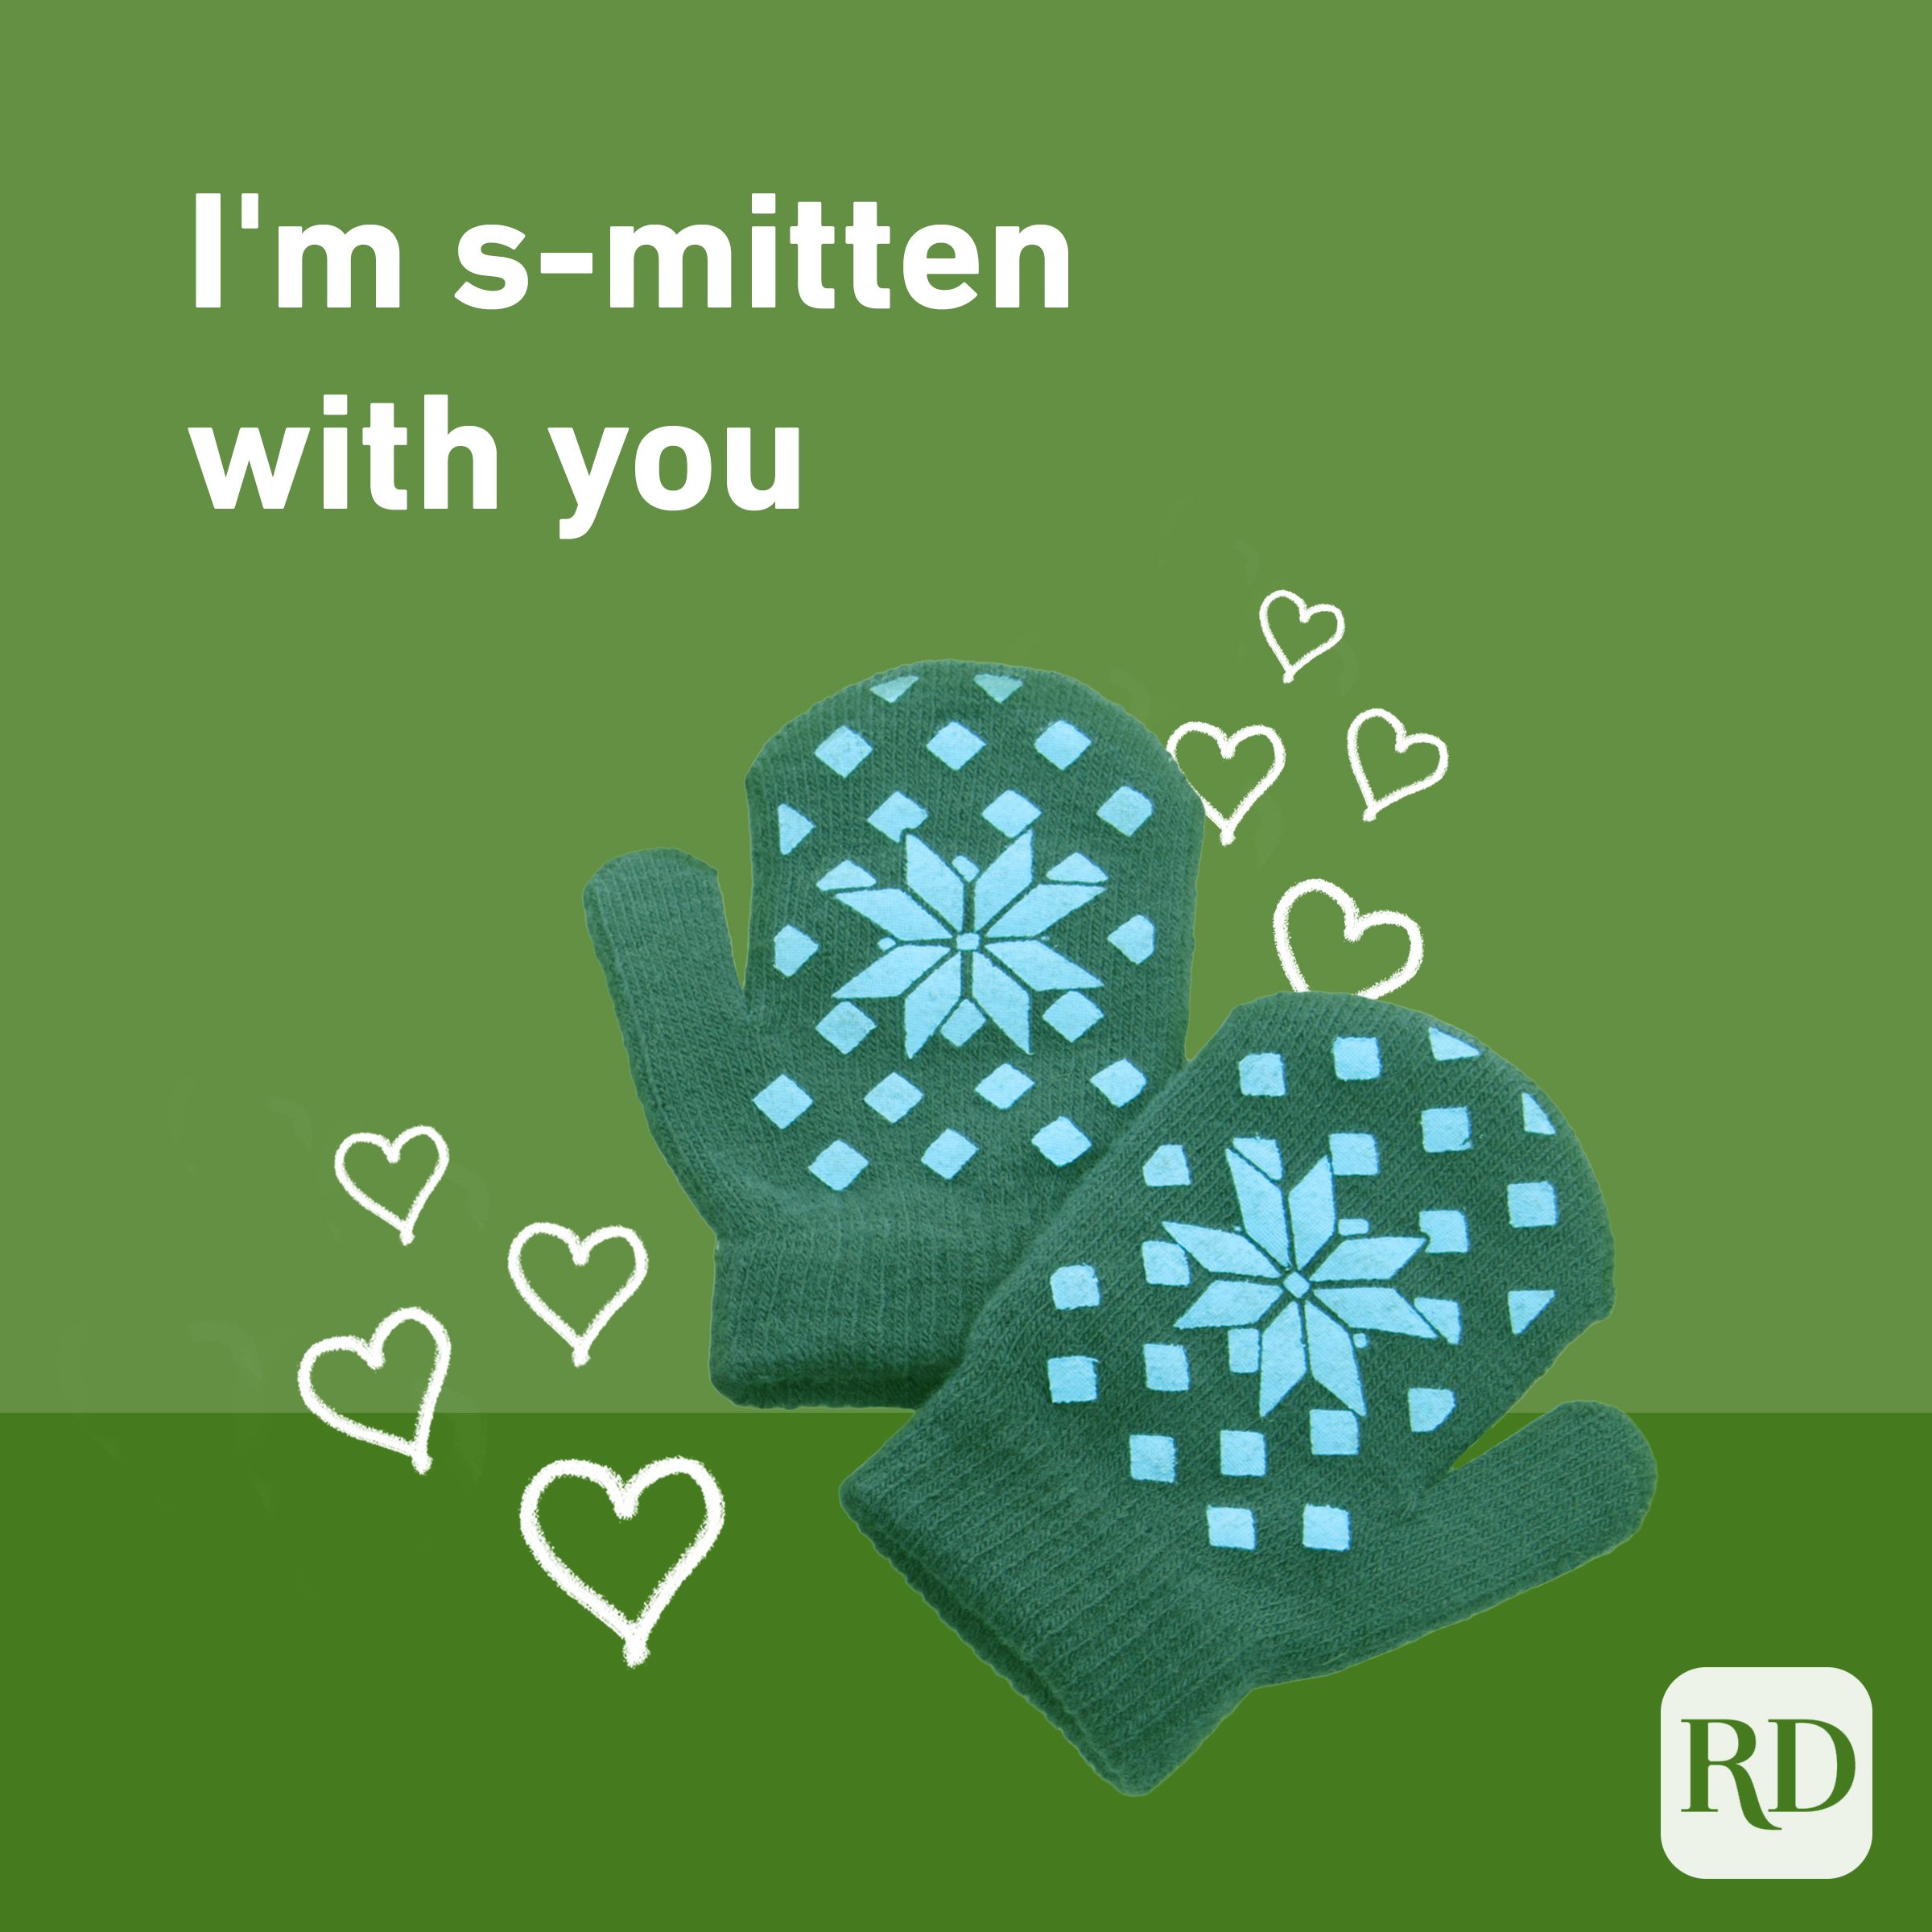 I'm s-mitten with you with mittens and handdrawn hearts around them